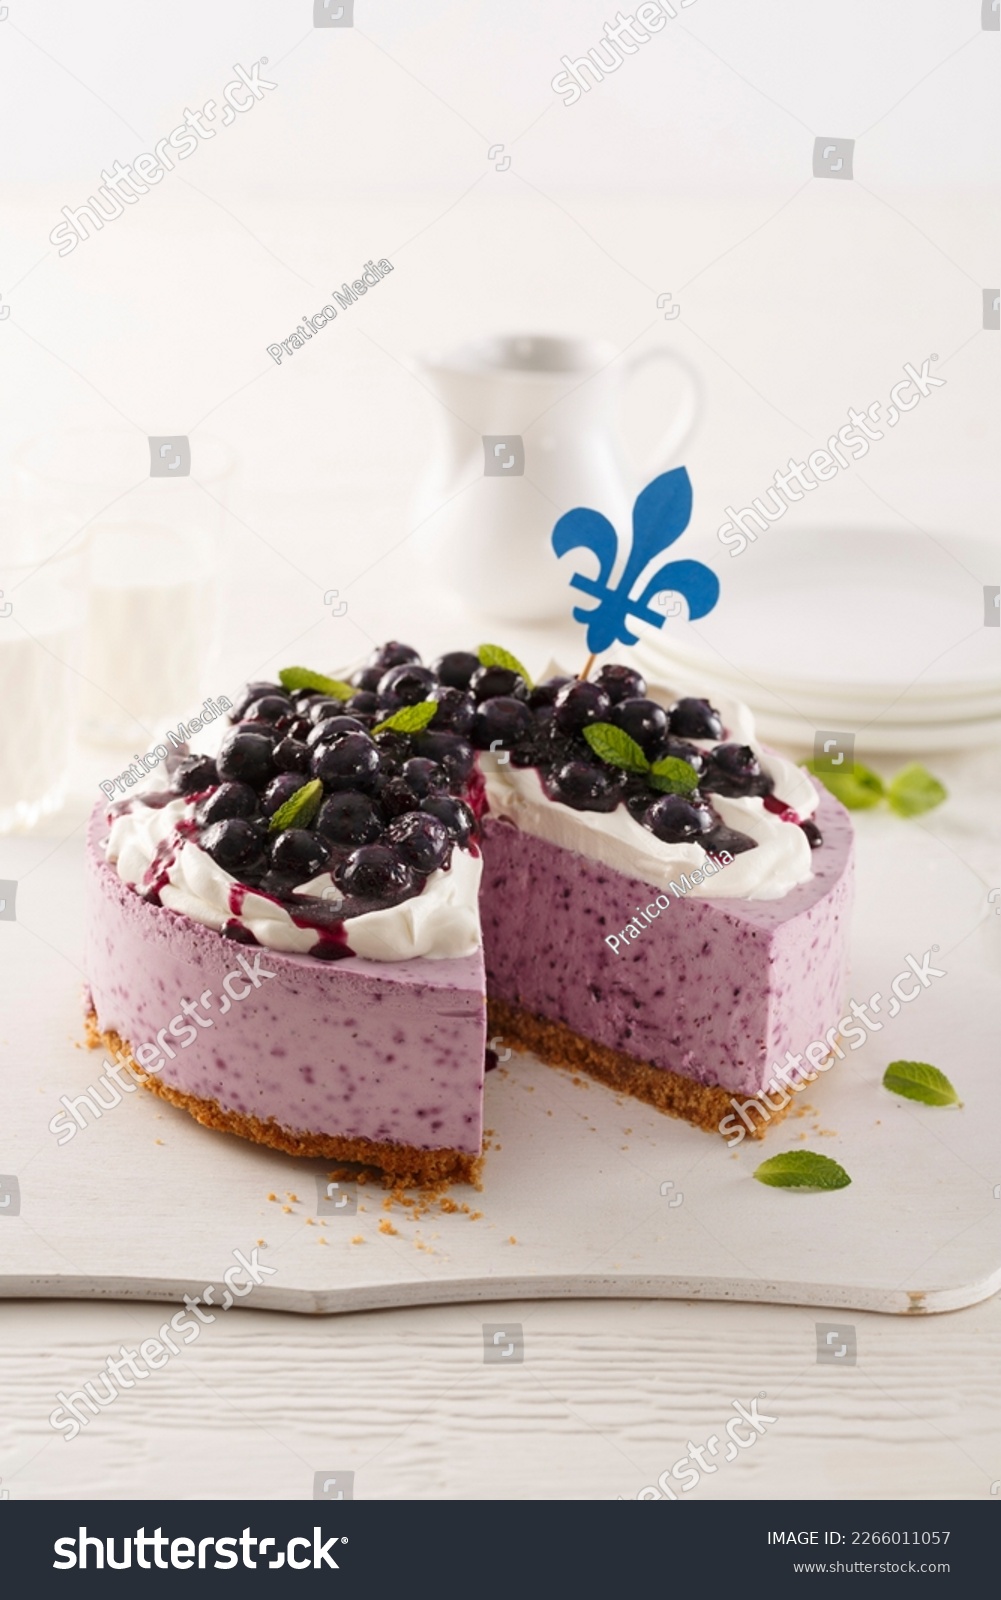 Blueberry cheesecake for the St-Jean-Baptiste #2266011057